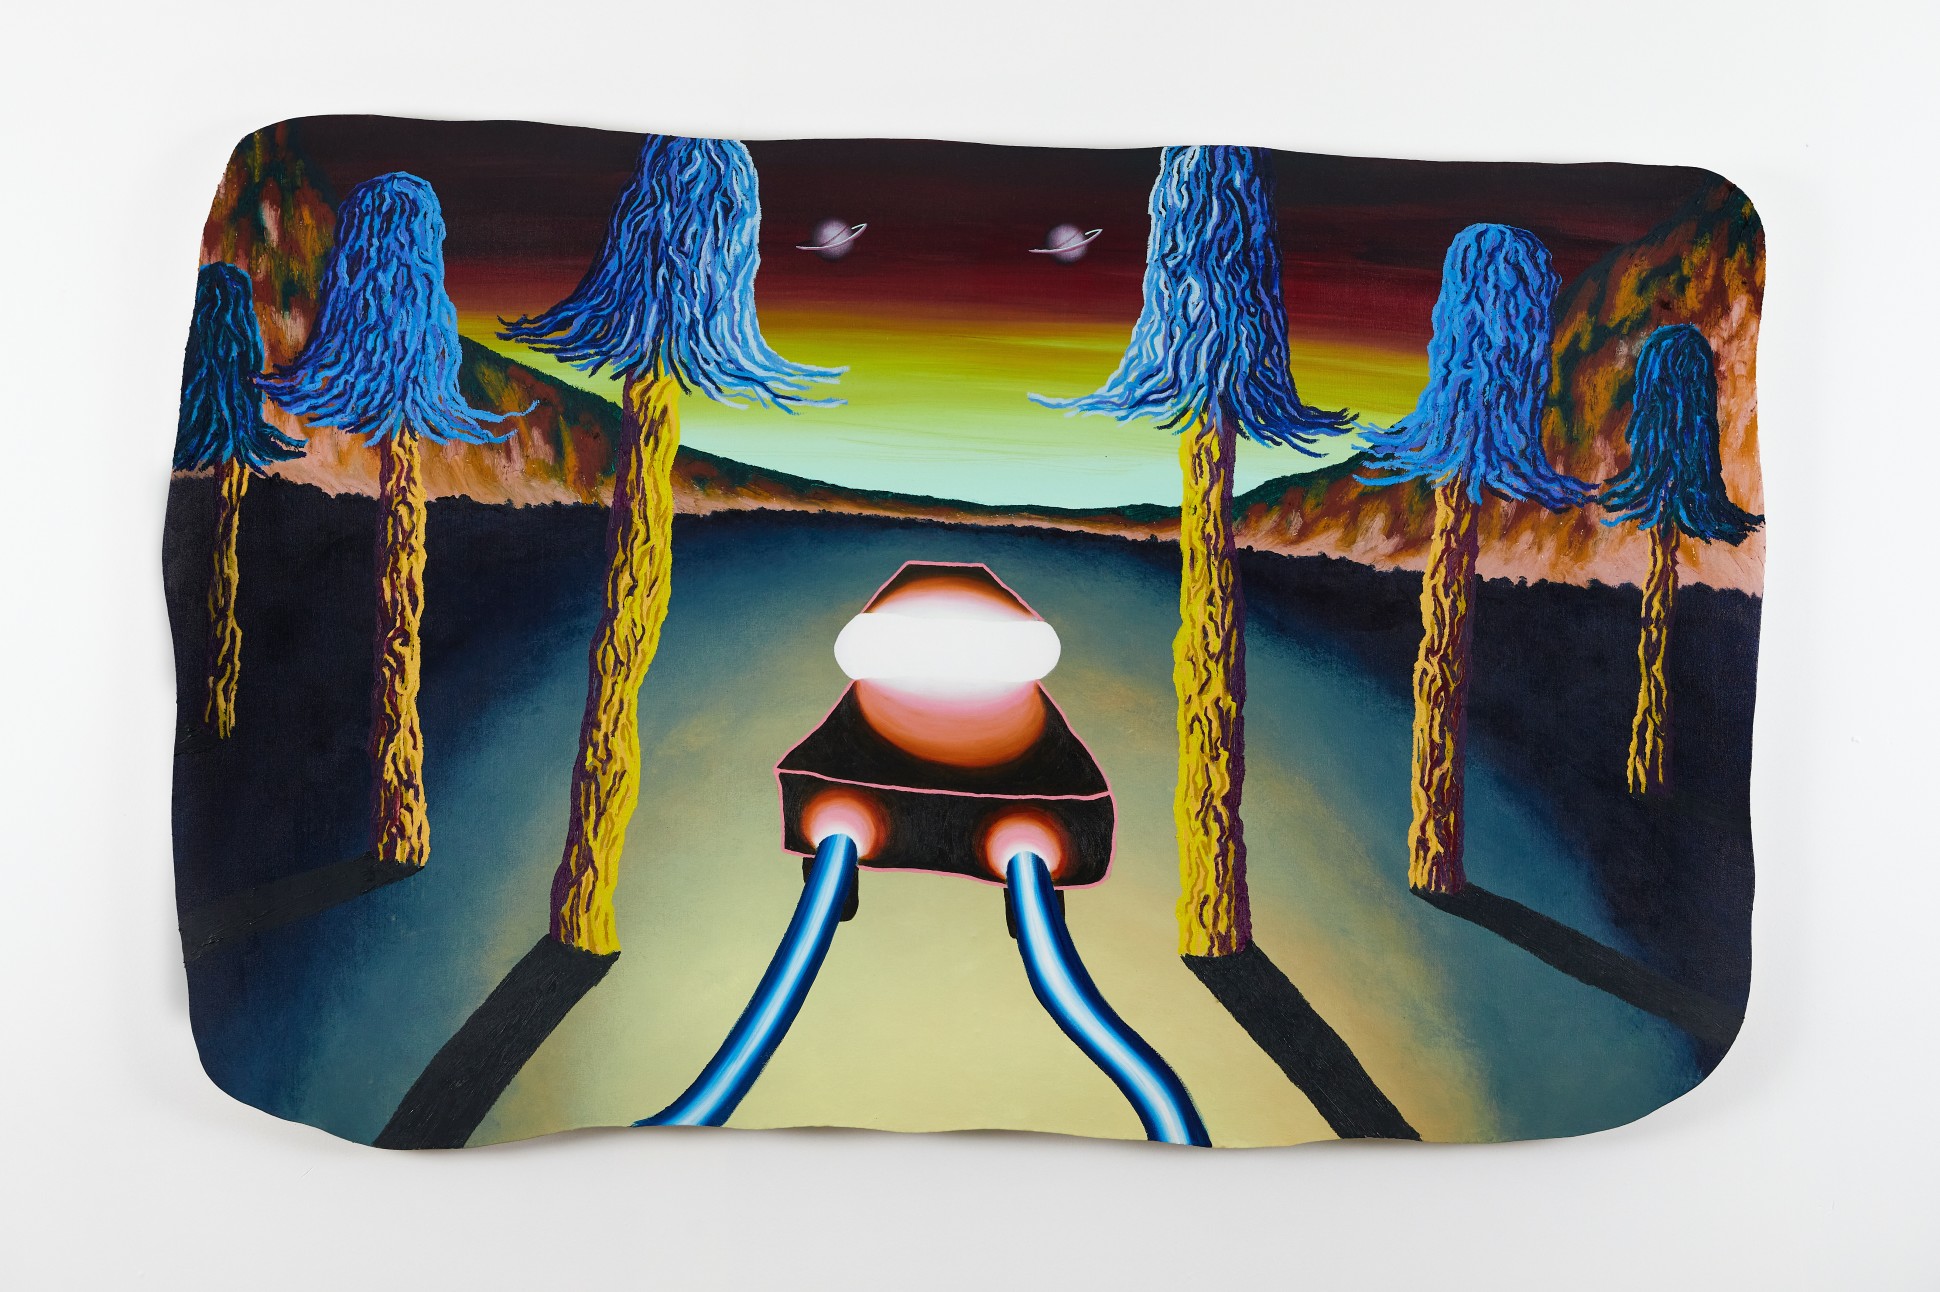 Night Car (Jannus), 2021 Oil stick and acrylic on canvas approx. 122 x 183 x 5 cm. / 48 x 72 x 2 in.